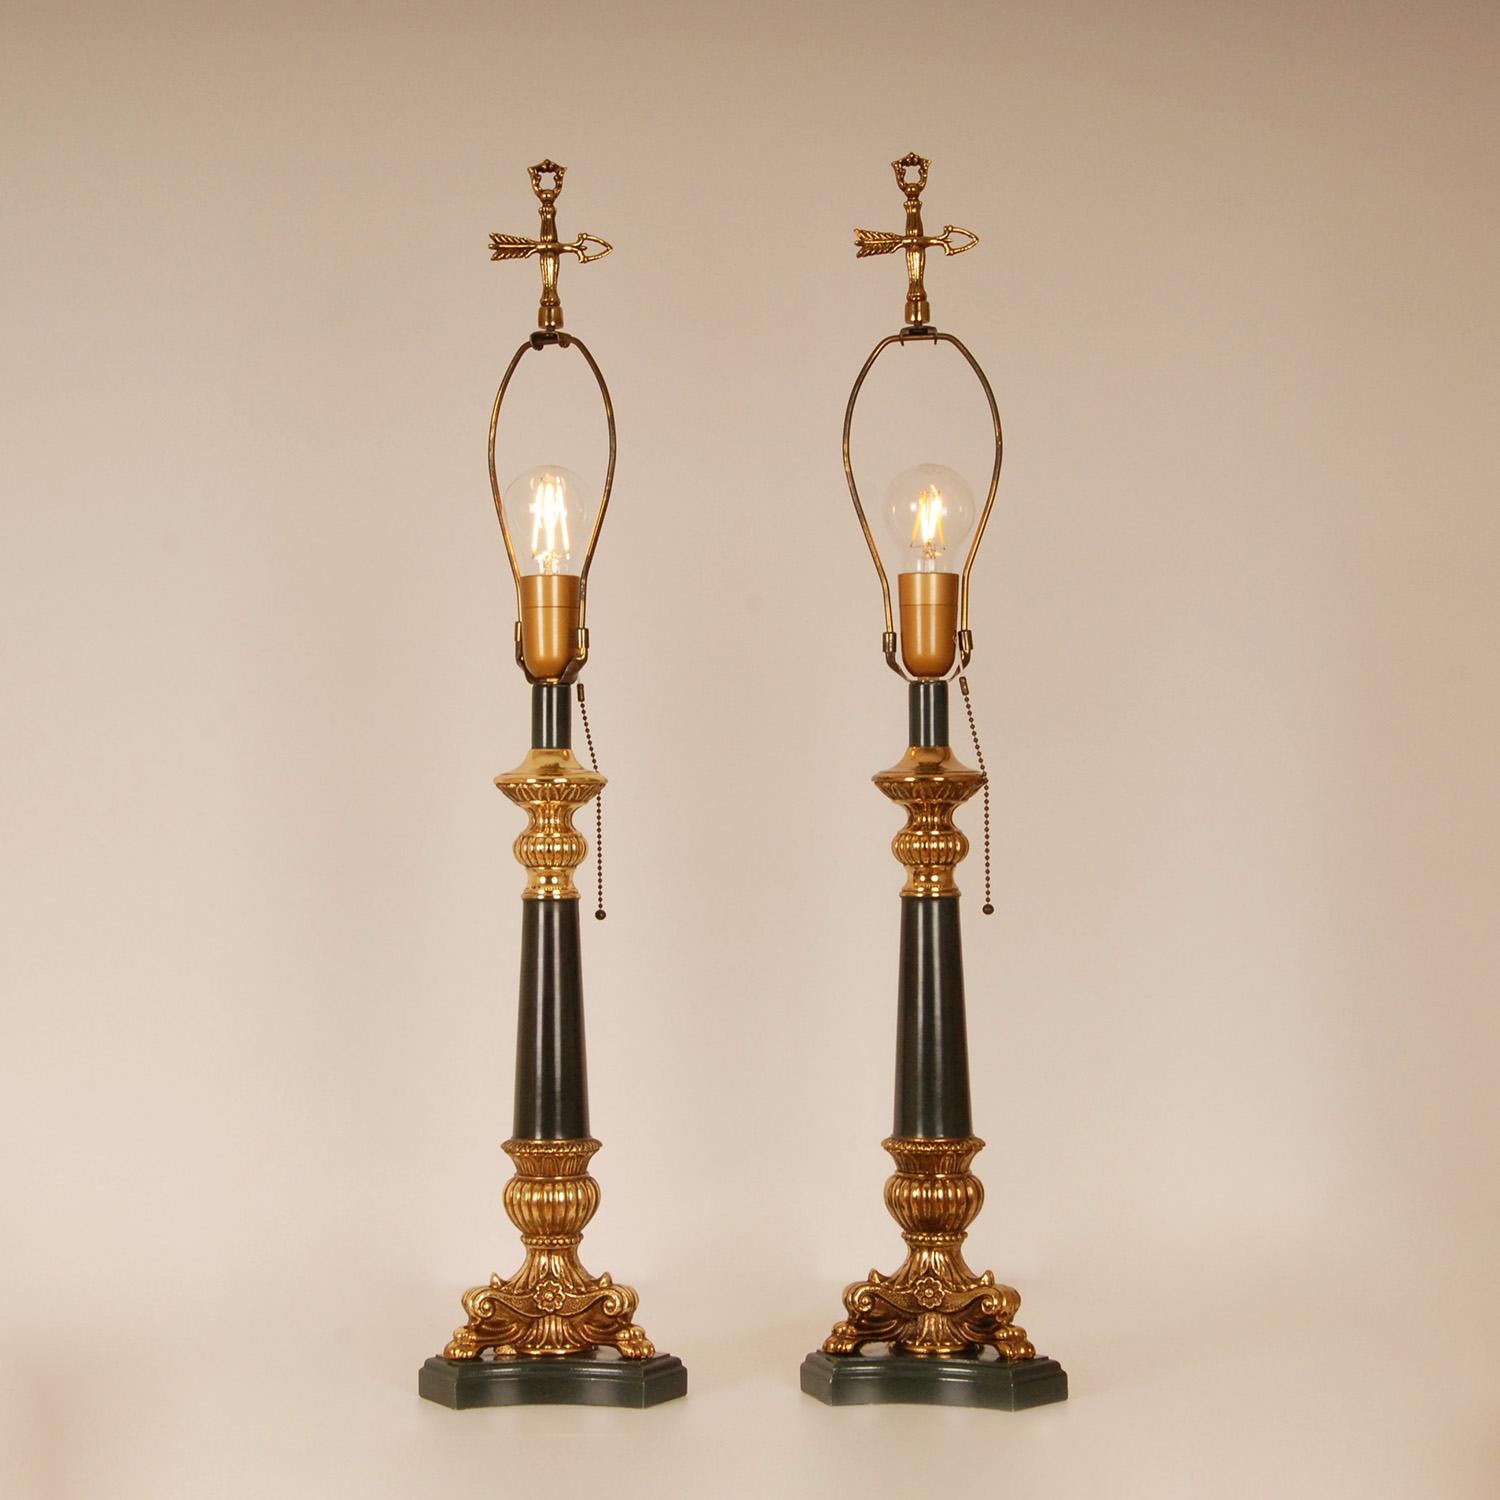 French Bouillotte Lamps Napoleonic Empire Green Gold Gilded Vintage Table Lamps In Good Condition For Sale In Wommelgem, VAN